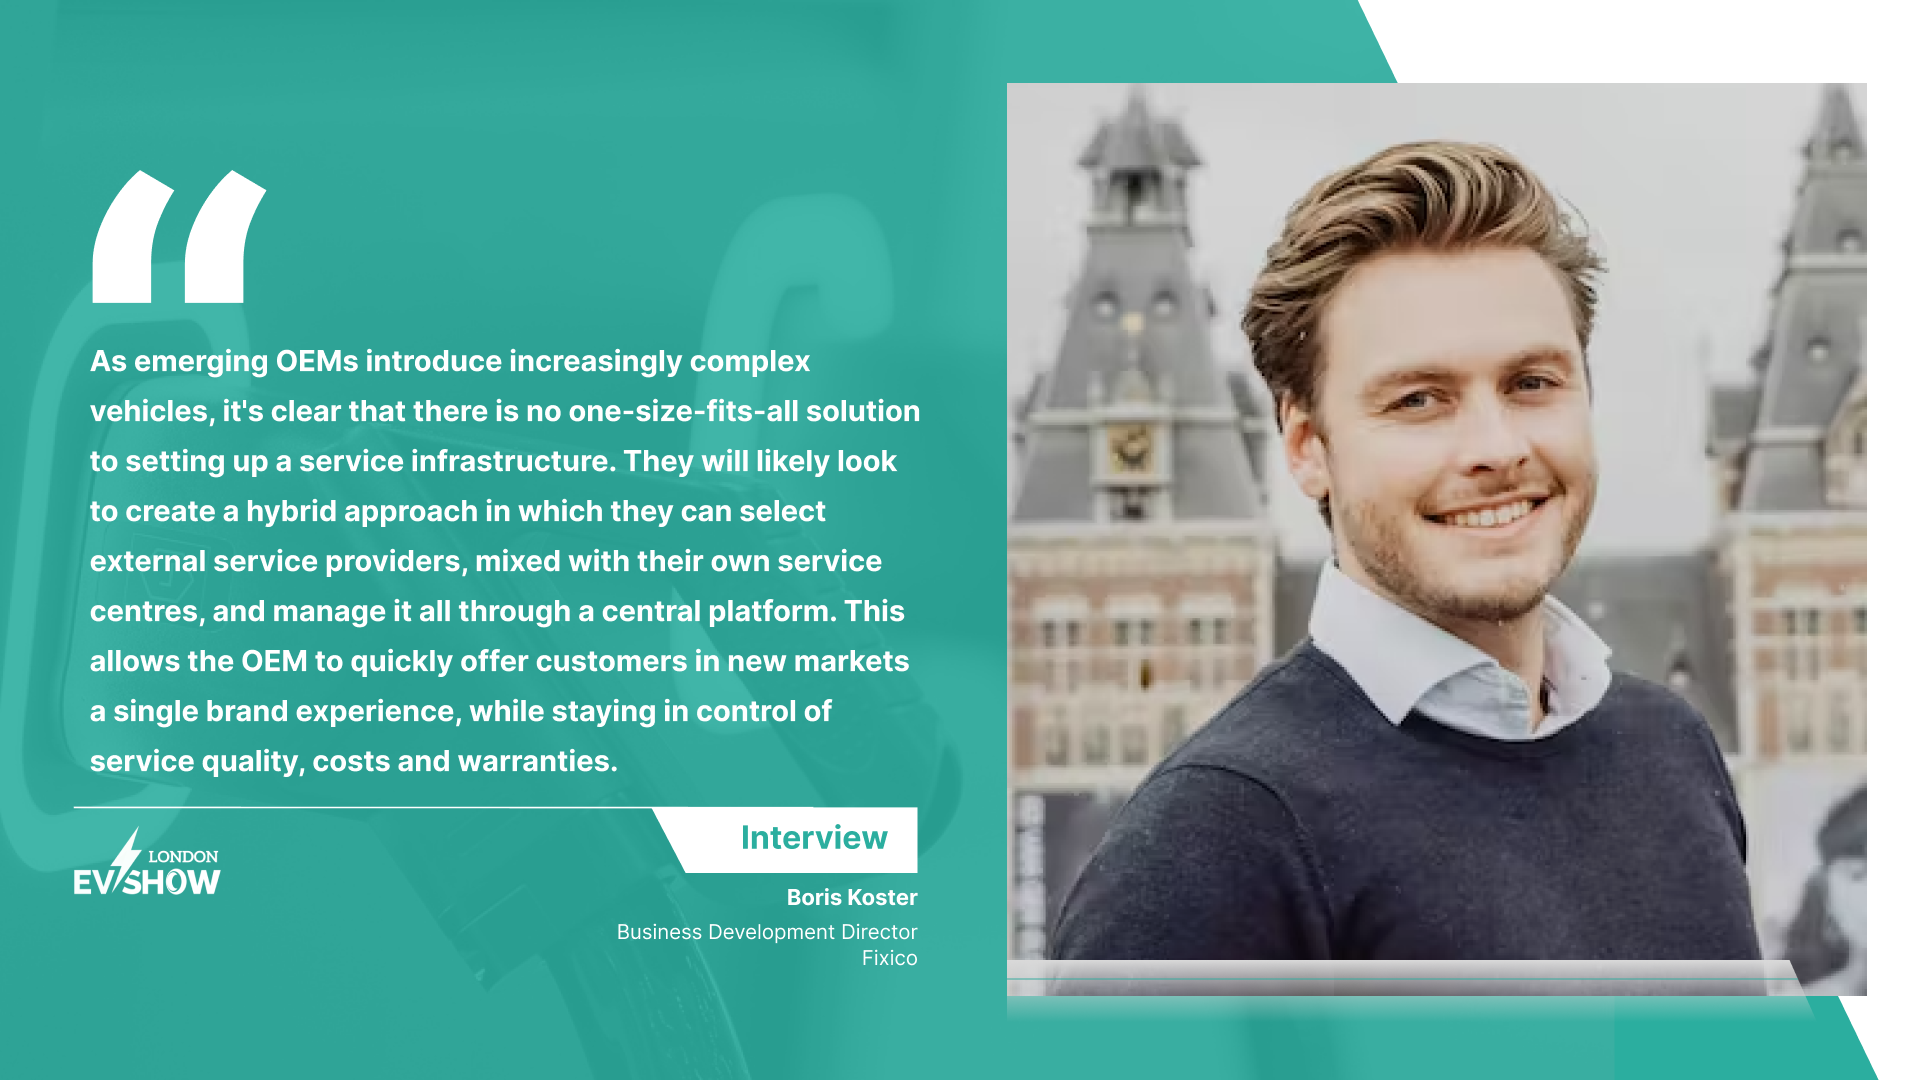 Insightful Q&A Session With Boris Koster, Business Development Director, Fixico